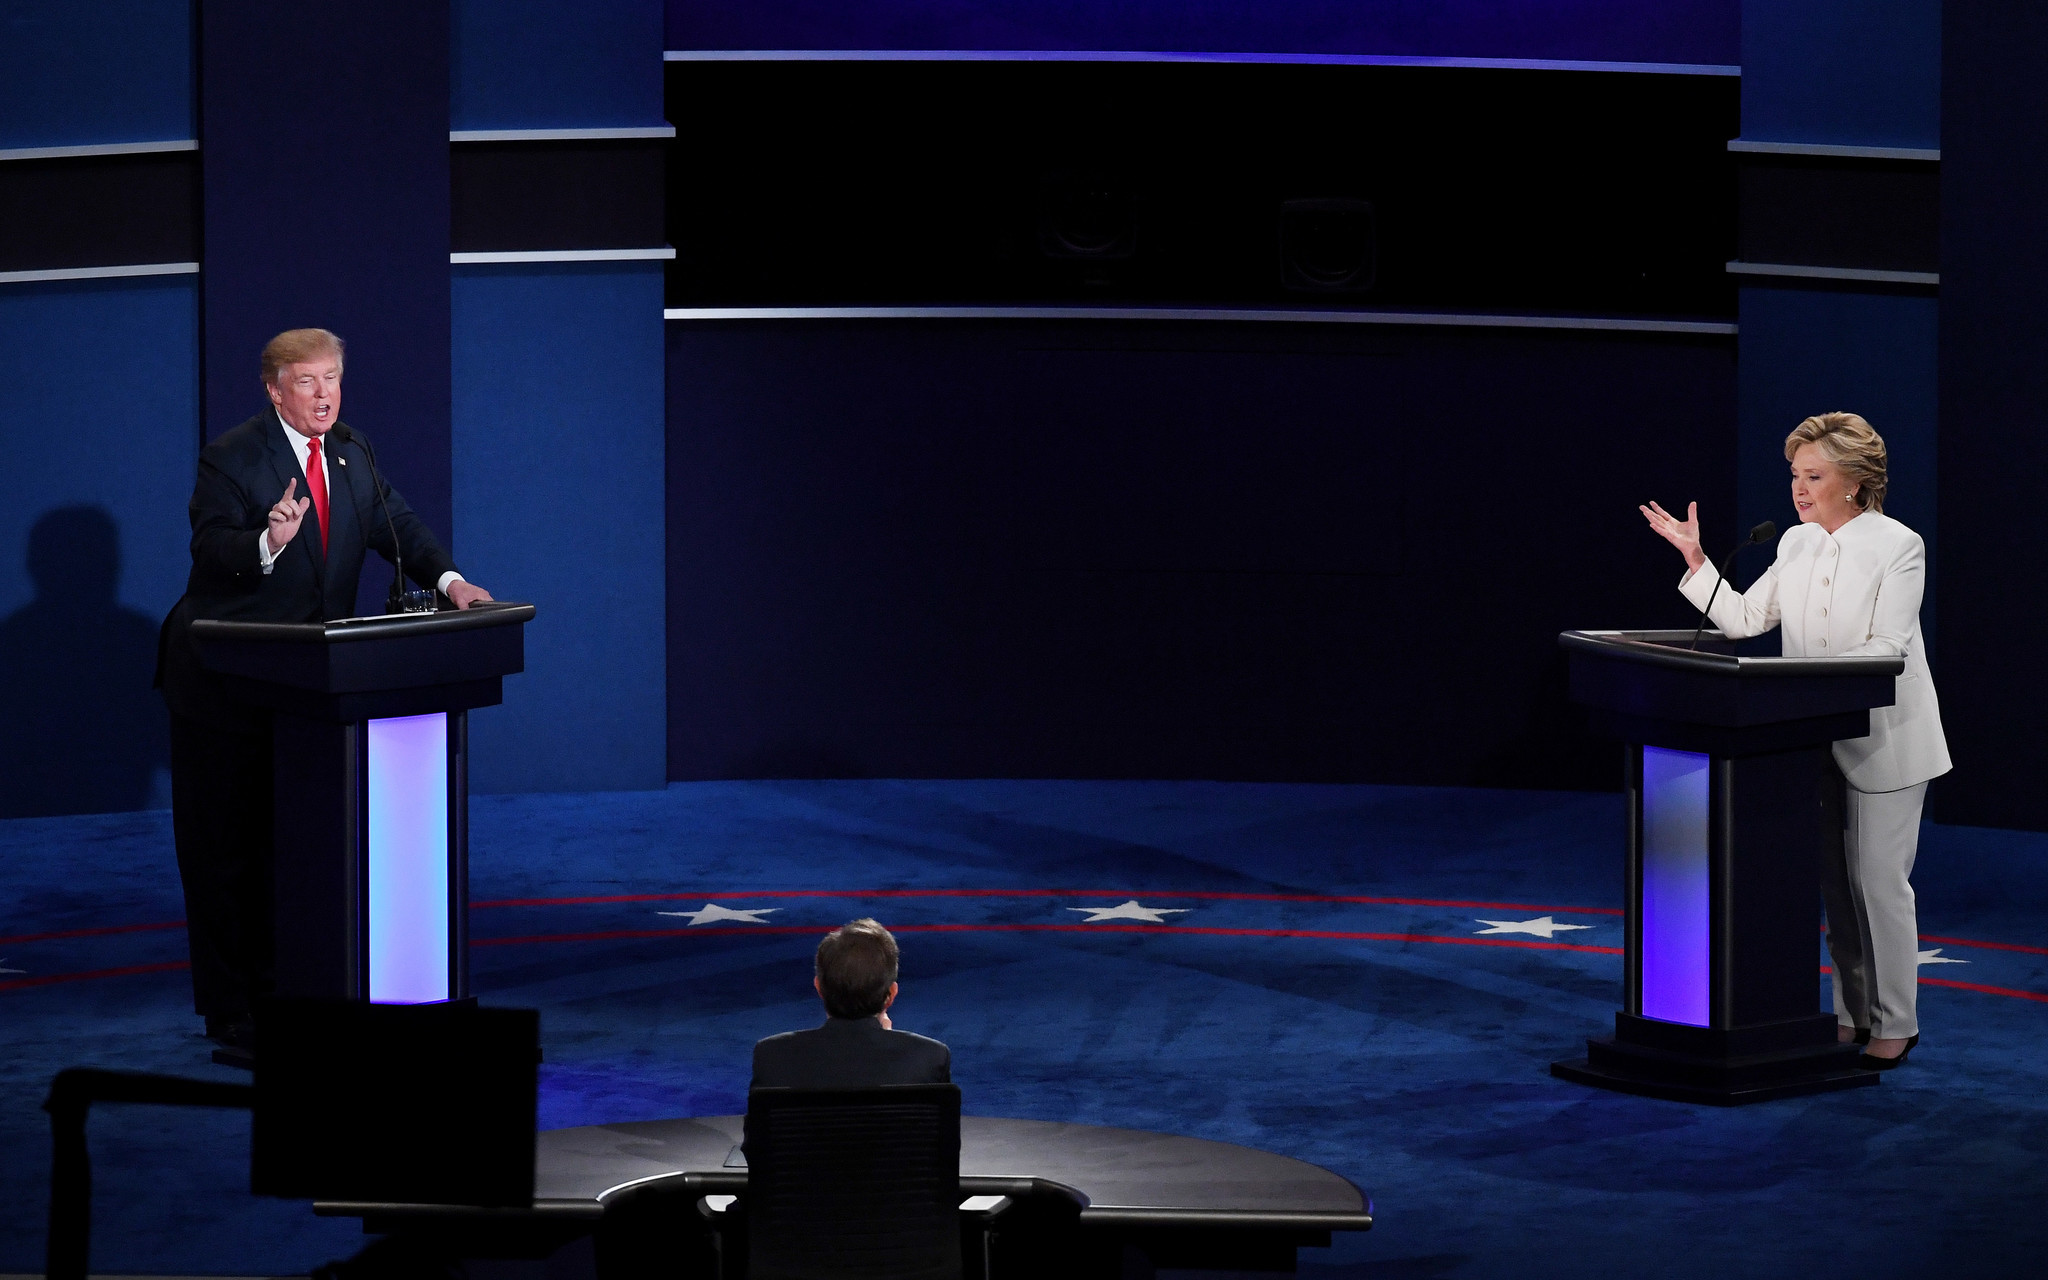 Goodnight, democracy: The best late-night jokes about the final presidential debate ...